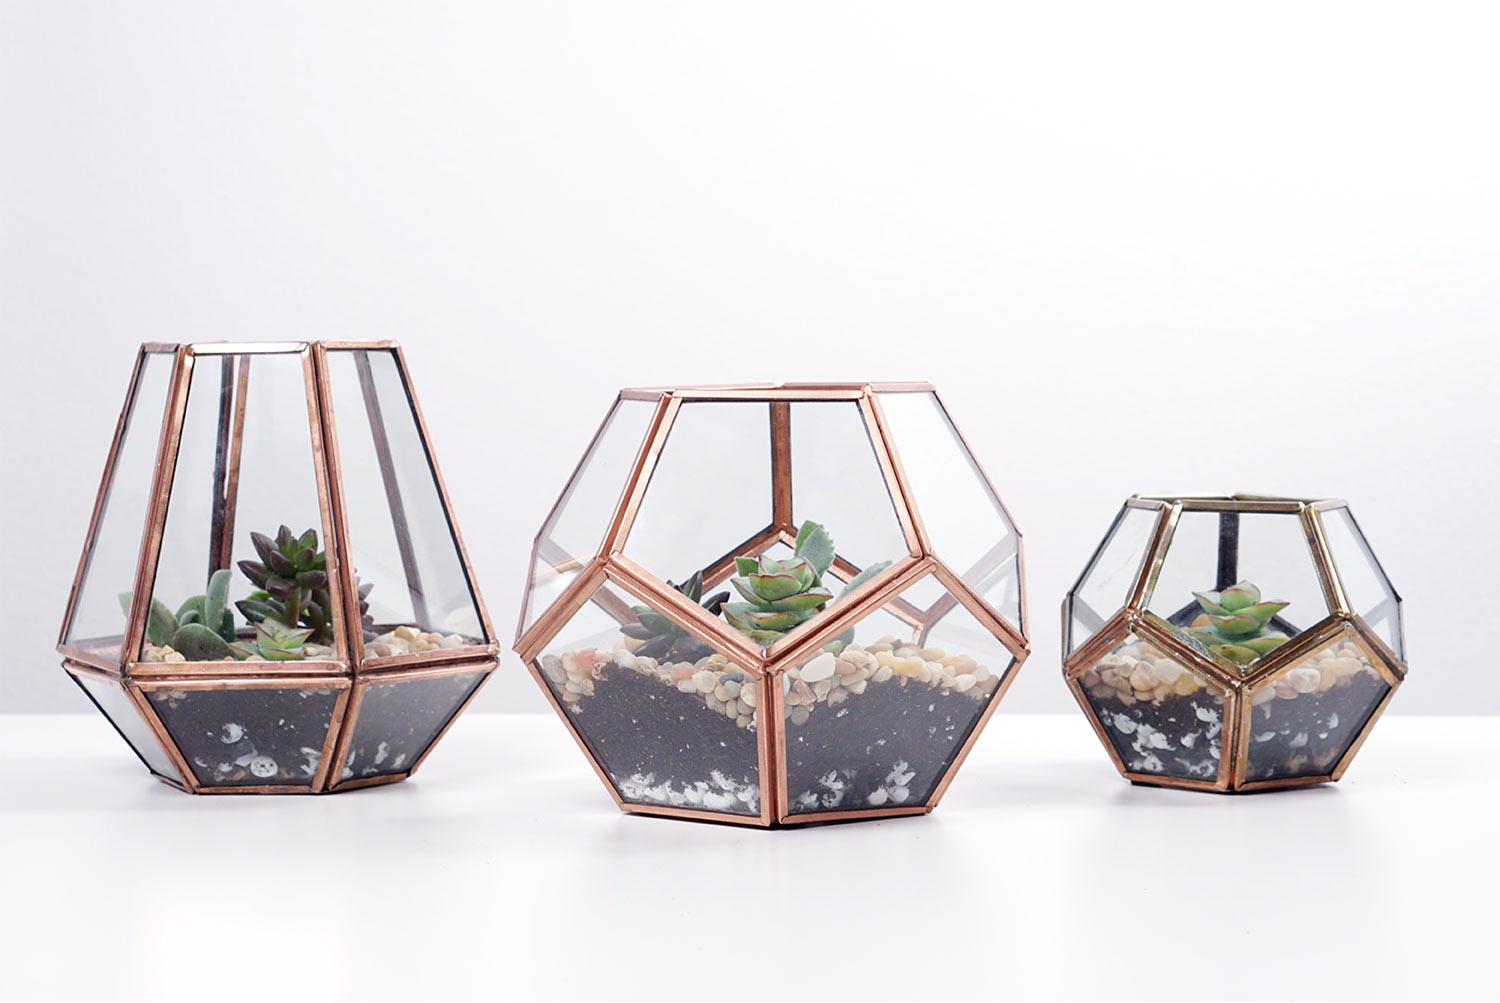 How to plant a terrarium - Gardens Illustrated